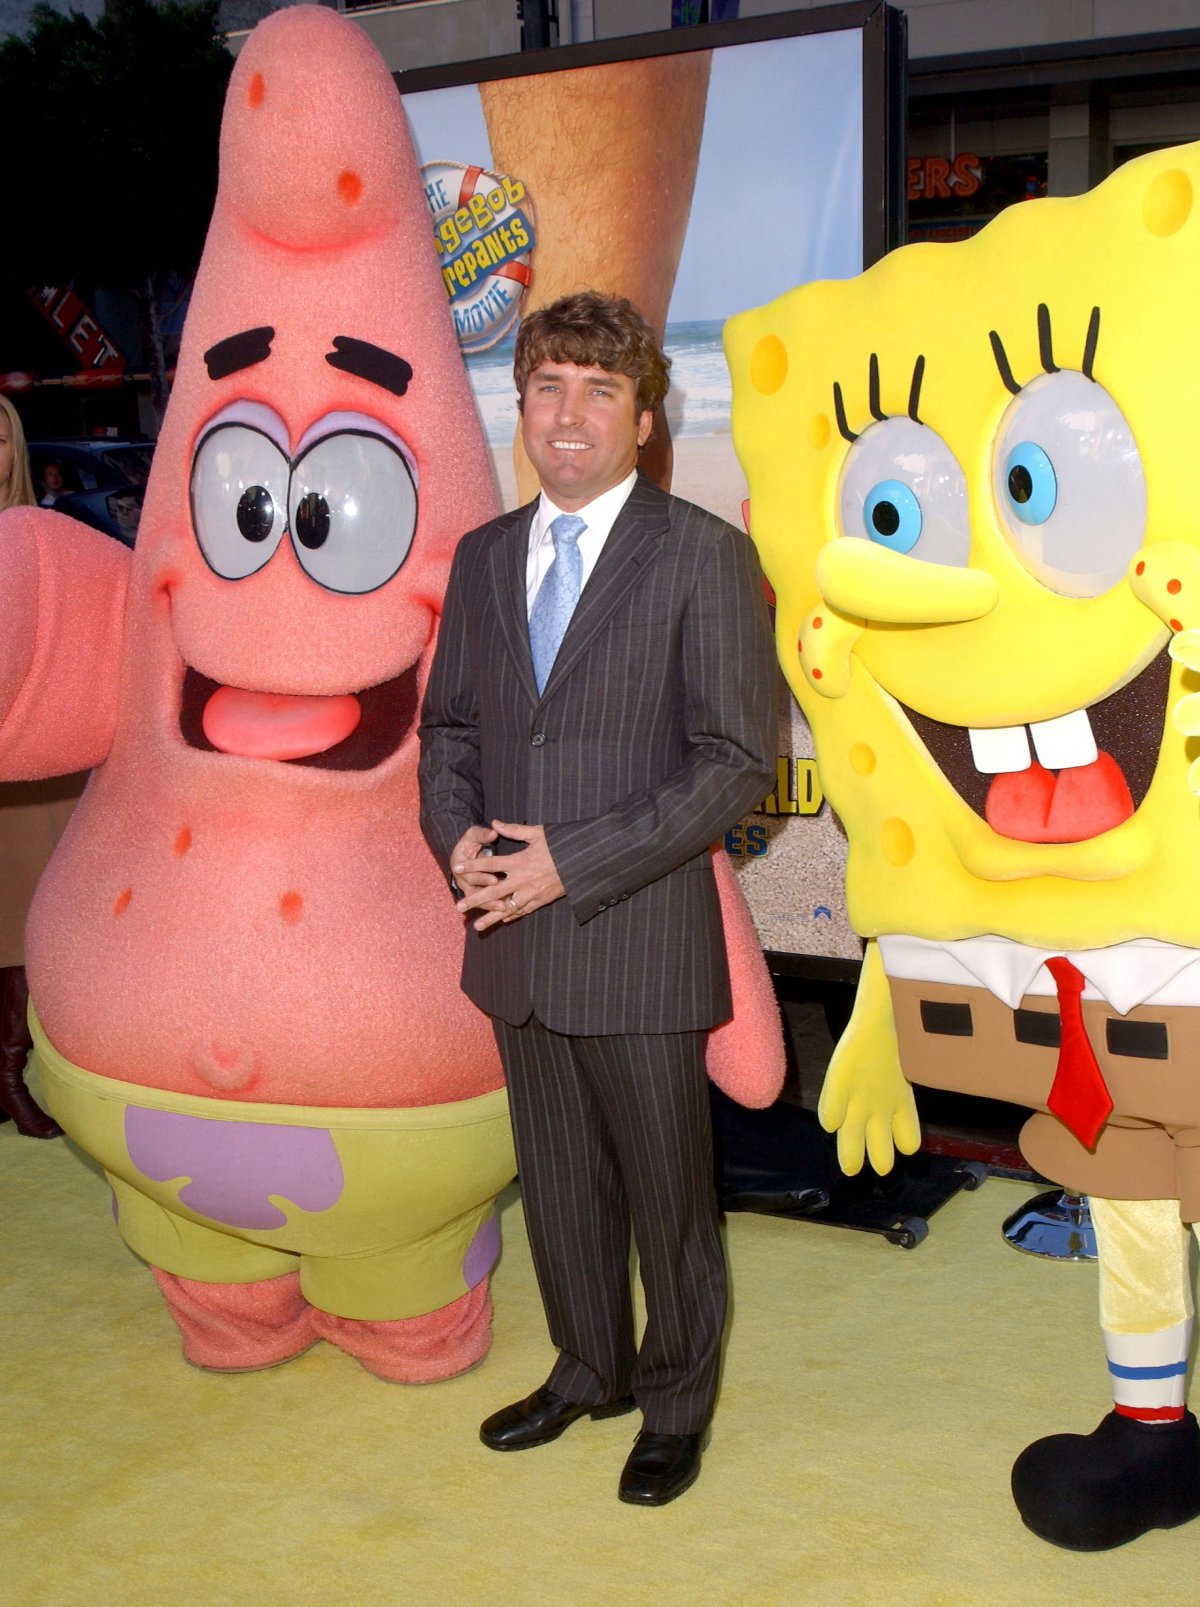 Patrick Star, Stephen Hillenburg and SpongeBob SquarePants attend the Paramount Pictures world premiere of "The SpongeBob SquarePants Movie" held at The Graumann's Chinese Theatre in Hollywood, Calif. on Nov. 14, 2004. 